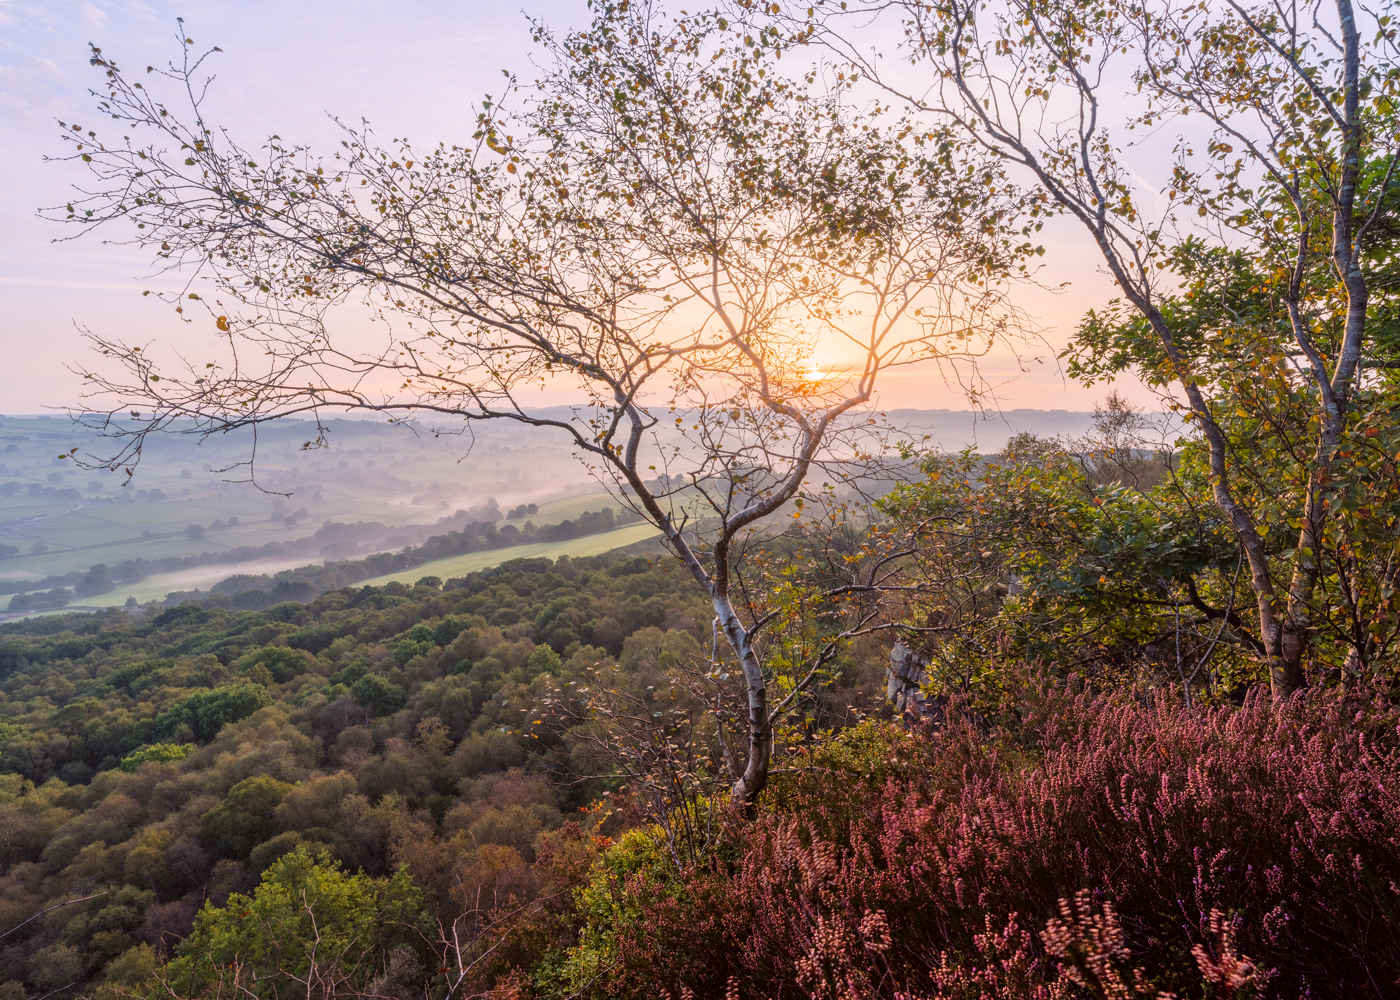 A sunrise peeks through a slender, leafy tree, casting a warm glow over a rolling landscape. Foreground heather adds a touch of purple, contrasting with the varied greens of distant woods and fields softened by a light mist. a view of a forest and the ocean